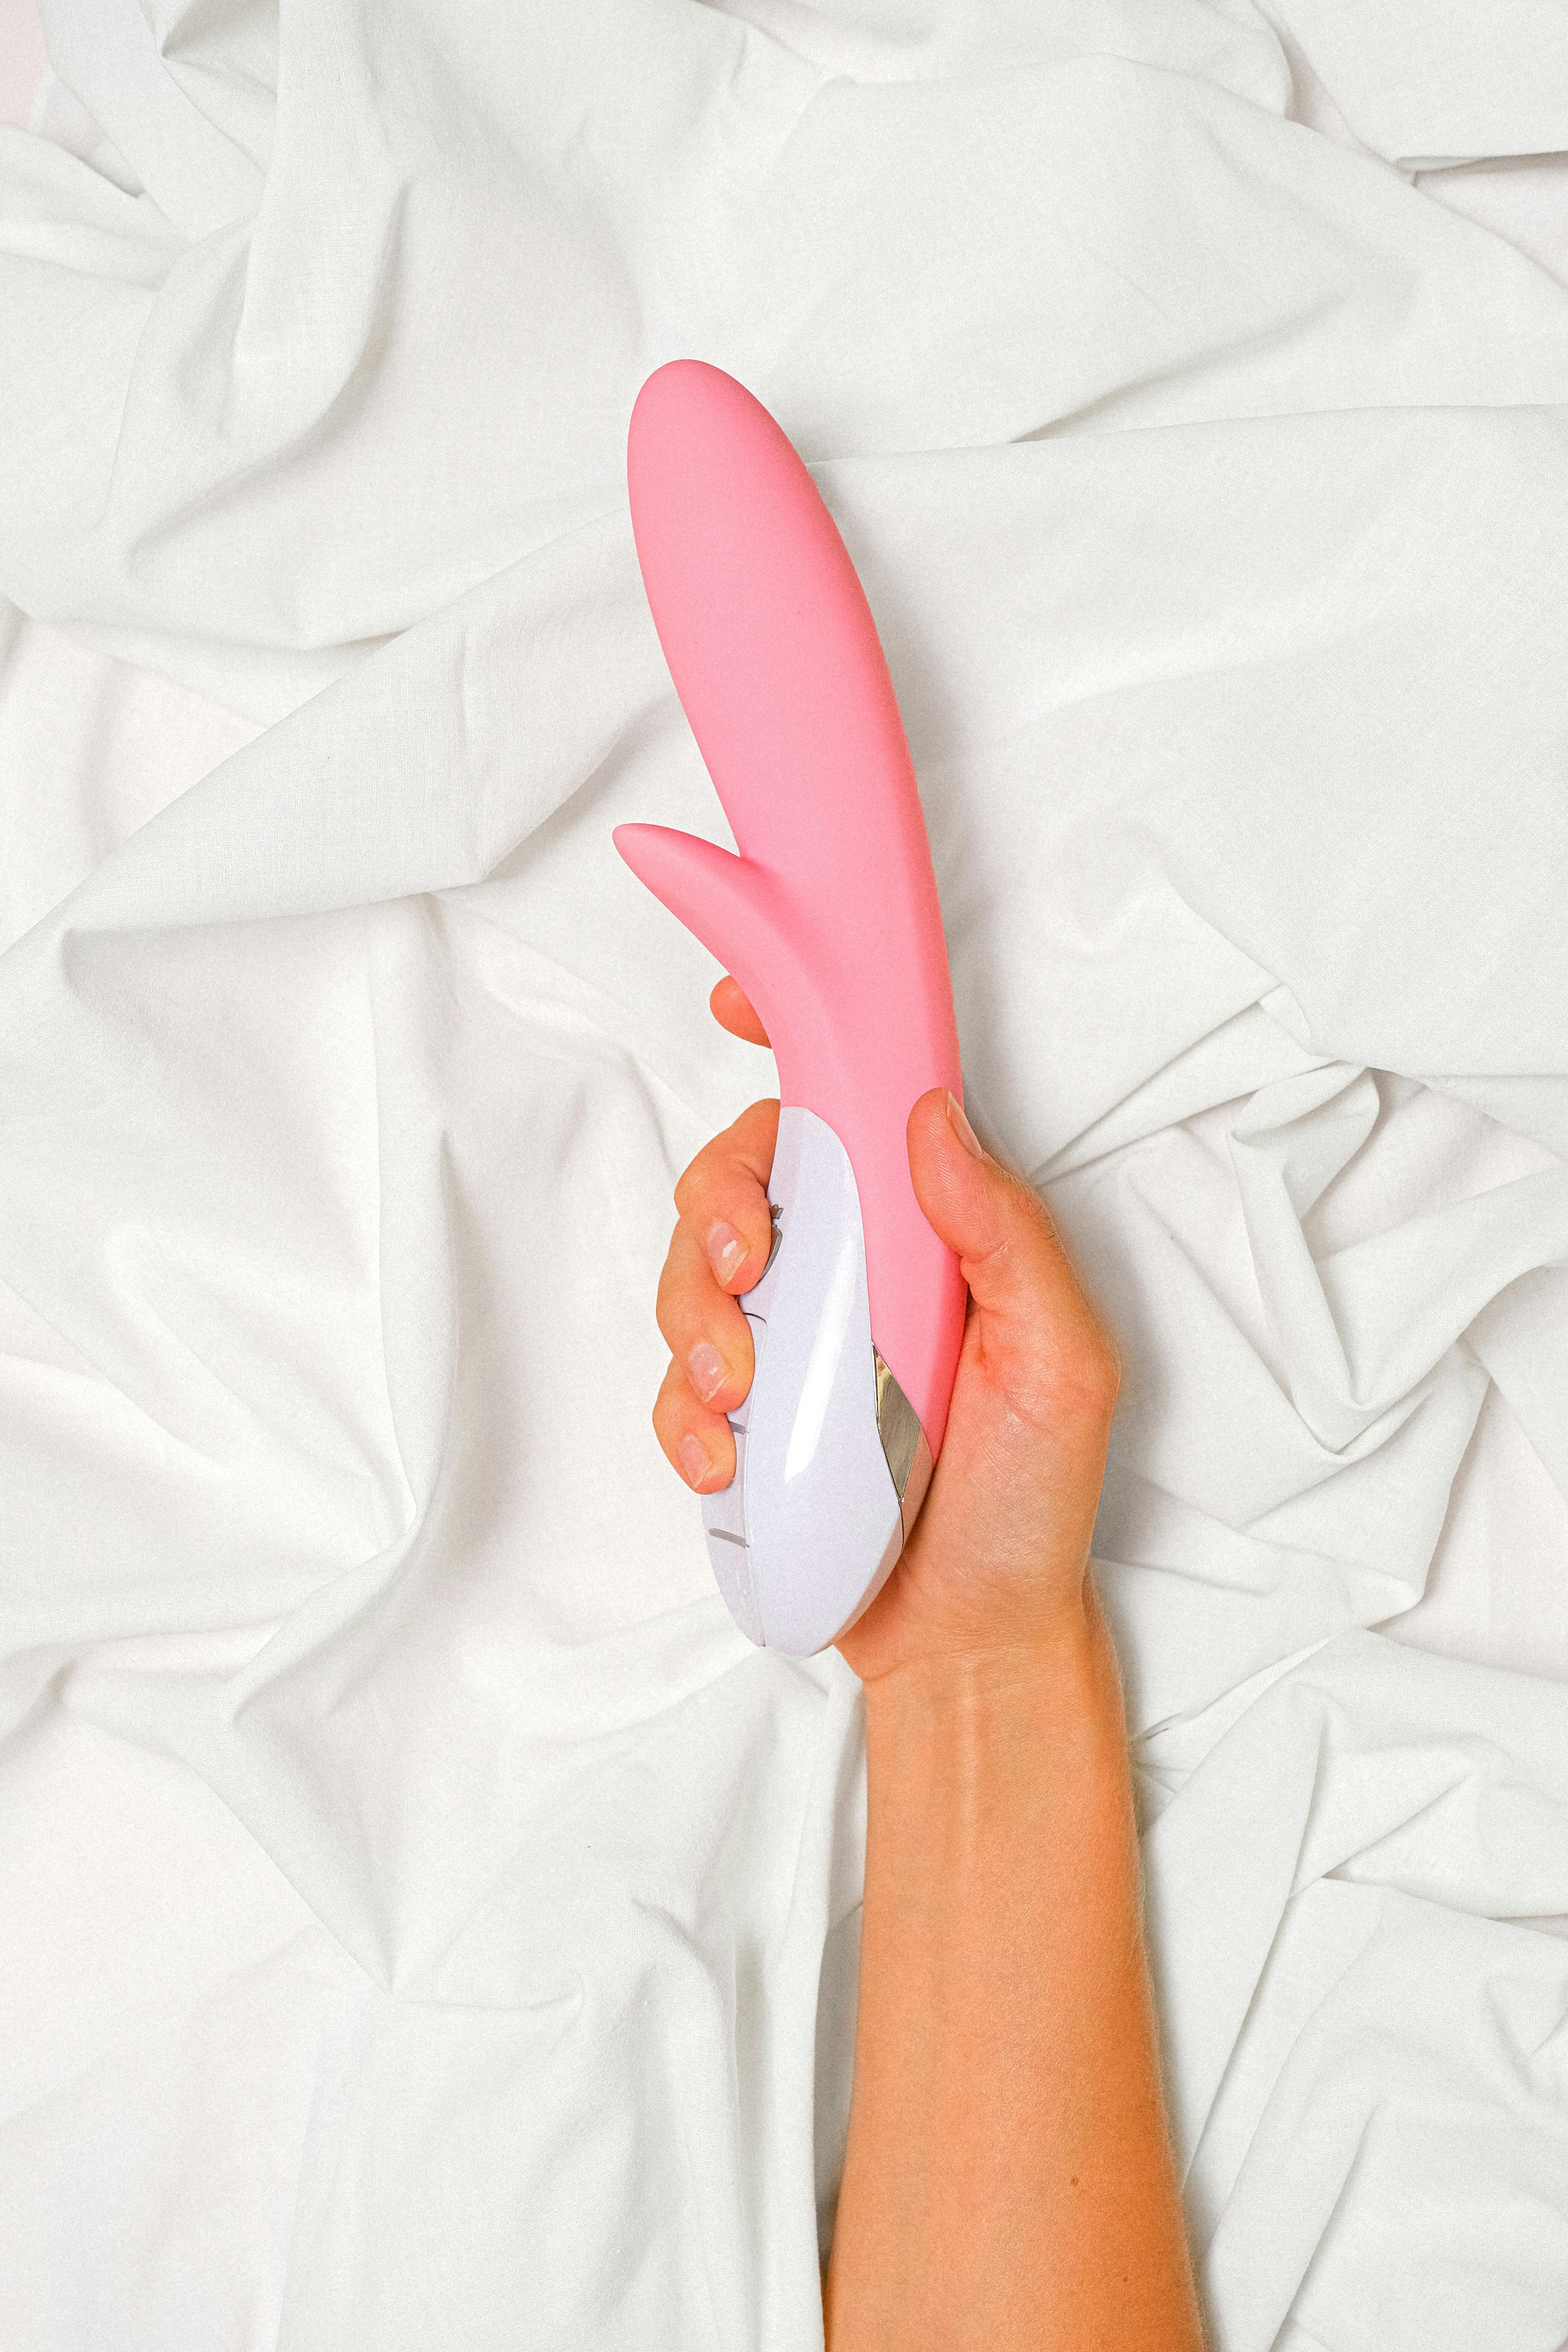 person holding a pink vibrator